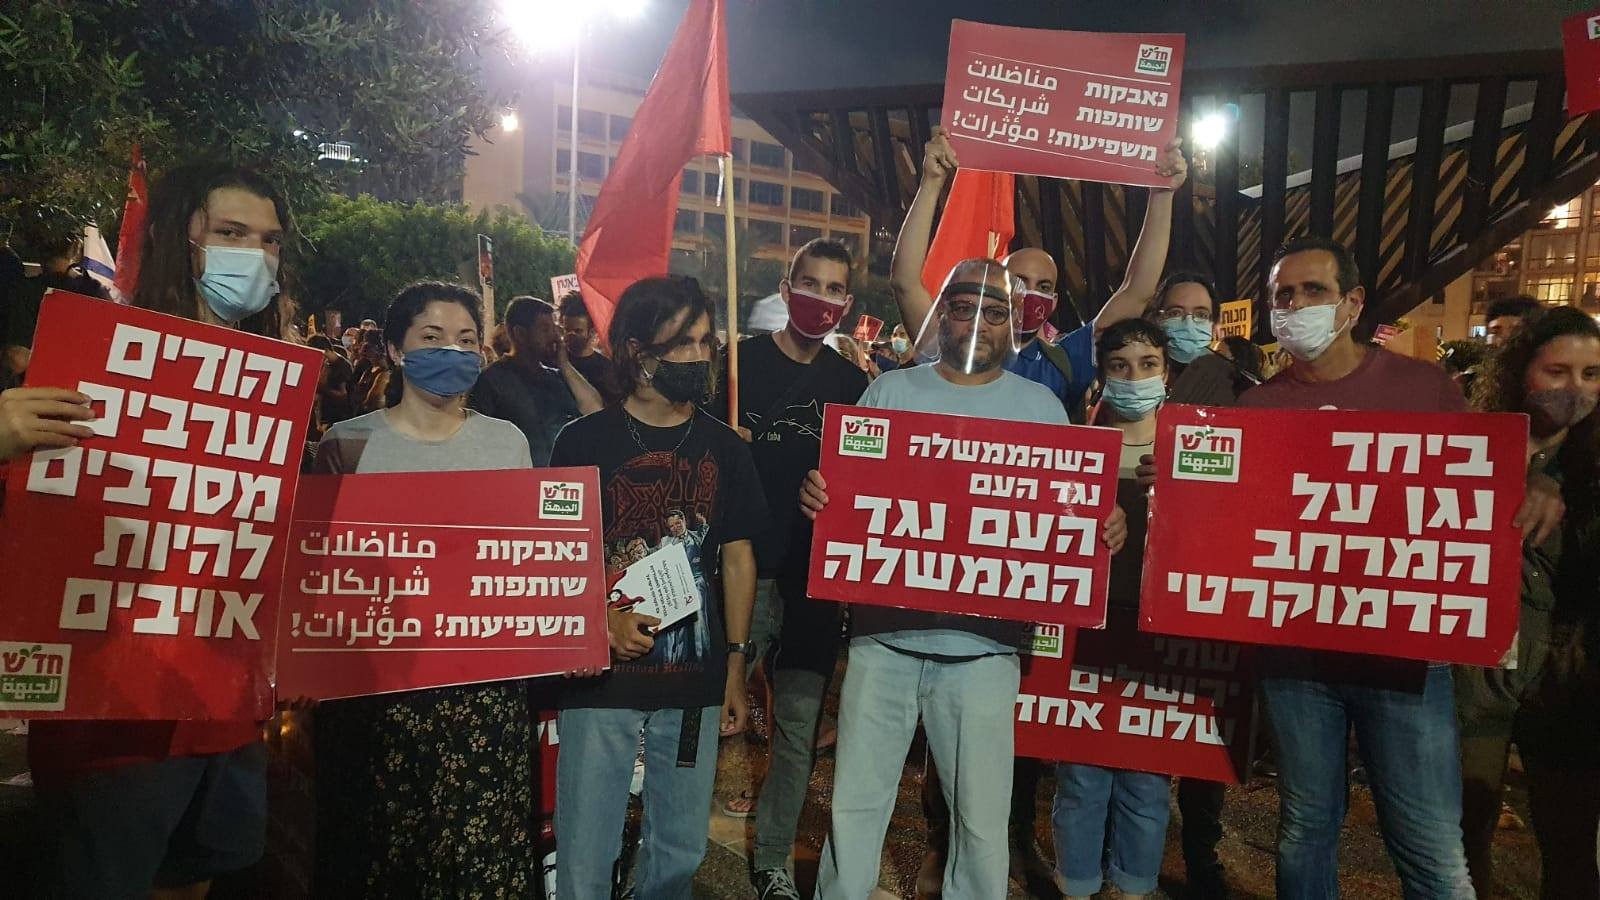 Activists and supporters of Hadash, among them MK Ofer Cassif (fourth from left), demonstrate against the neoliberal handling of the coronavirus economic crisis by Israel's far-right government, Saturday night, July 11, at Rabin Square in Central Tel Aviv. From right to left the Hadash placards read" "Together we'll defend the democratic space"; "When the government is against the people, the people are against the government"; "Struggling, Participating and Influencing"; "Jews and Arabs refuse to be enemies."